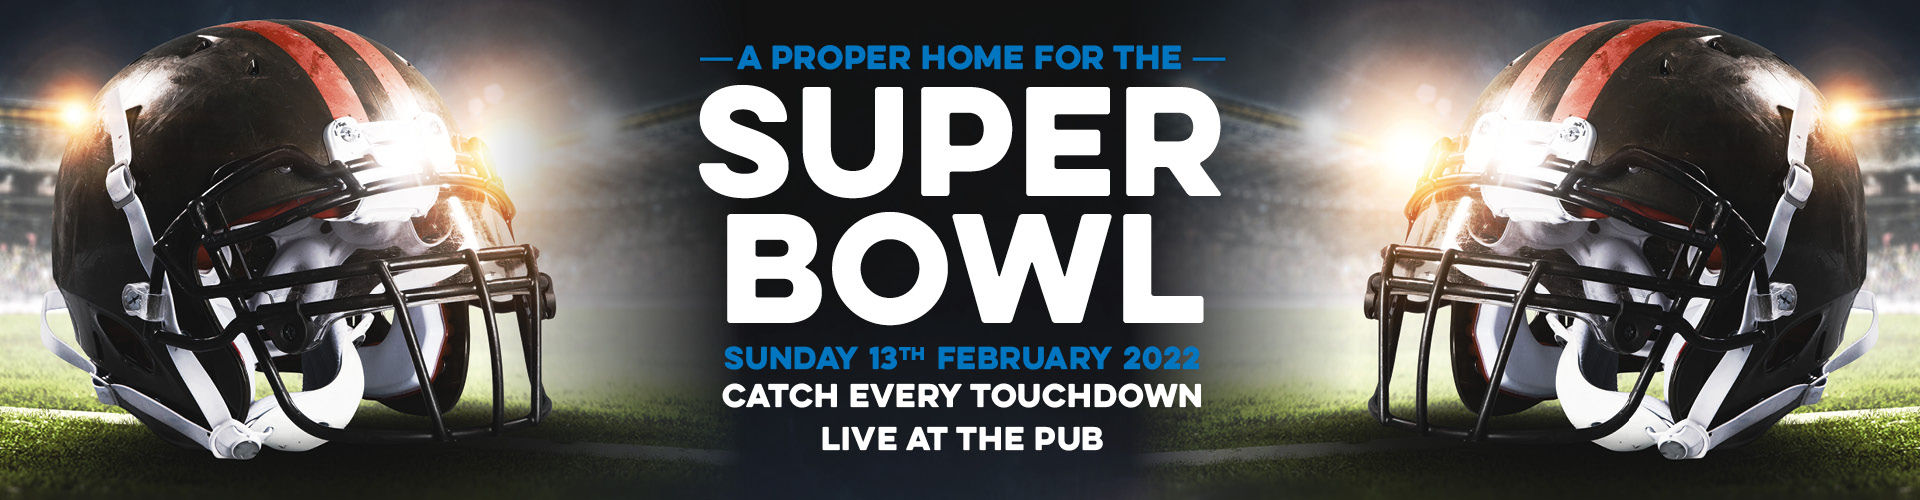 Watch Super Bowl 56 Live at Great UK Pubs